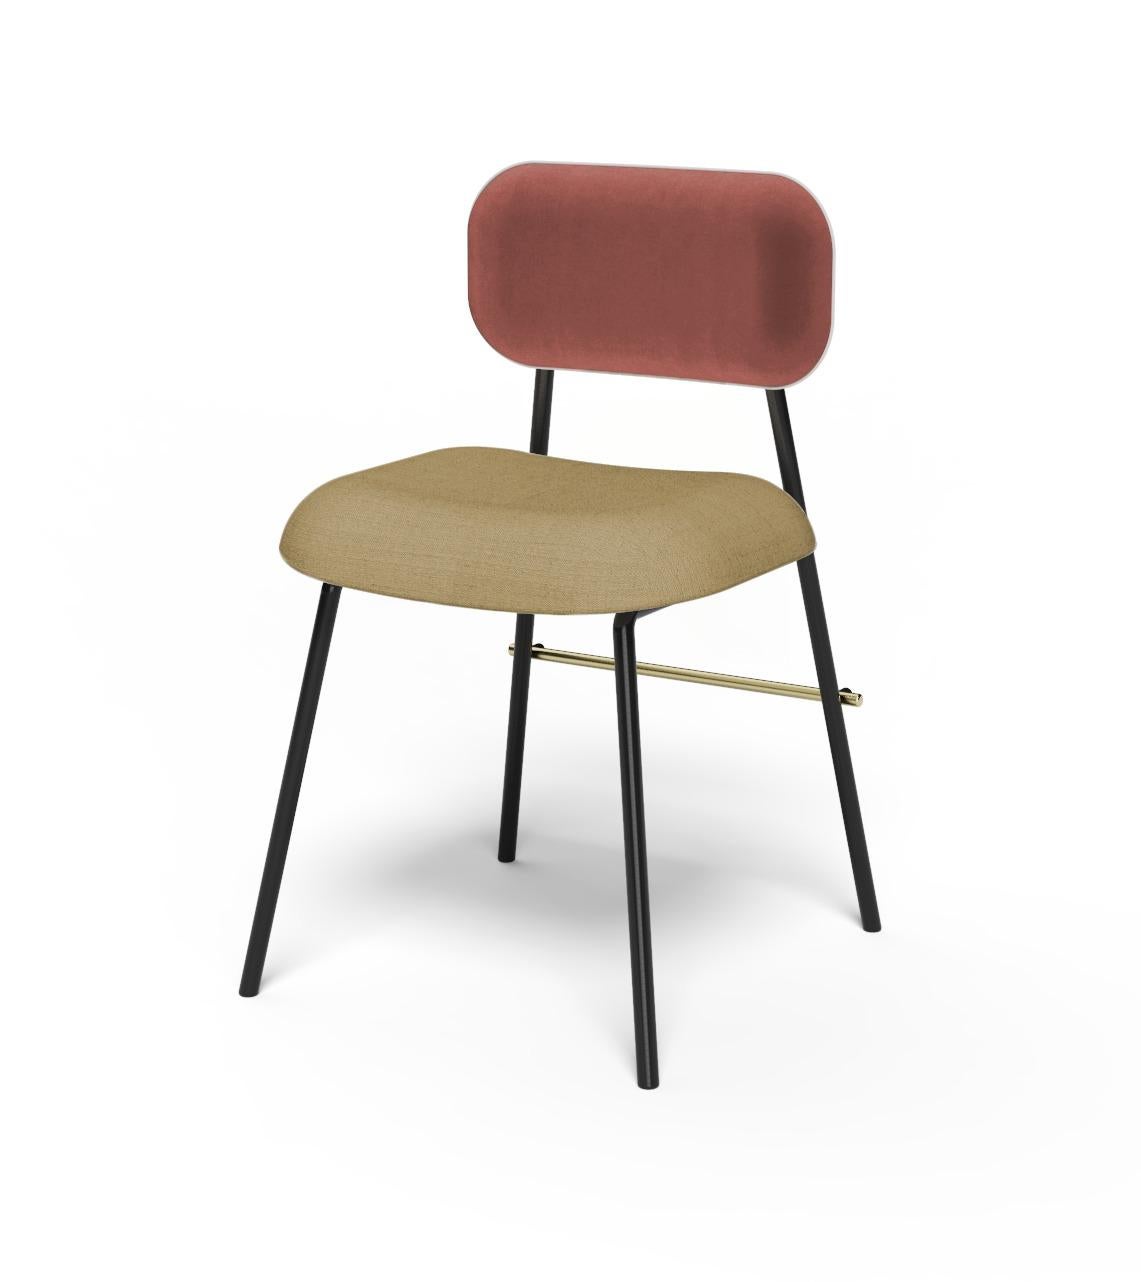 Miami chair by Dooq
Measures: H 83 x W 48 x D 50cm
 SH: 50cm
Materials: Fabric, lacquered metal

Dooq is a design company dedicated to celebrate the luxury of living. Creating designs that stimulate the senses, whose conceptual approach is